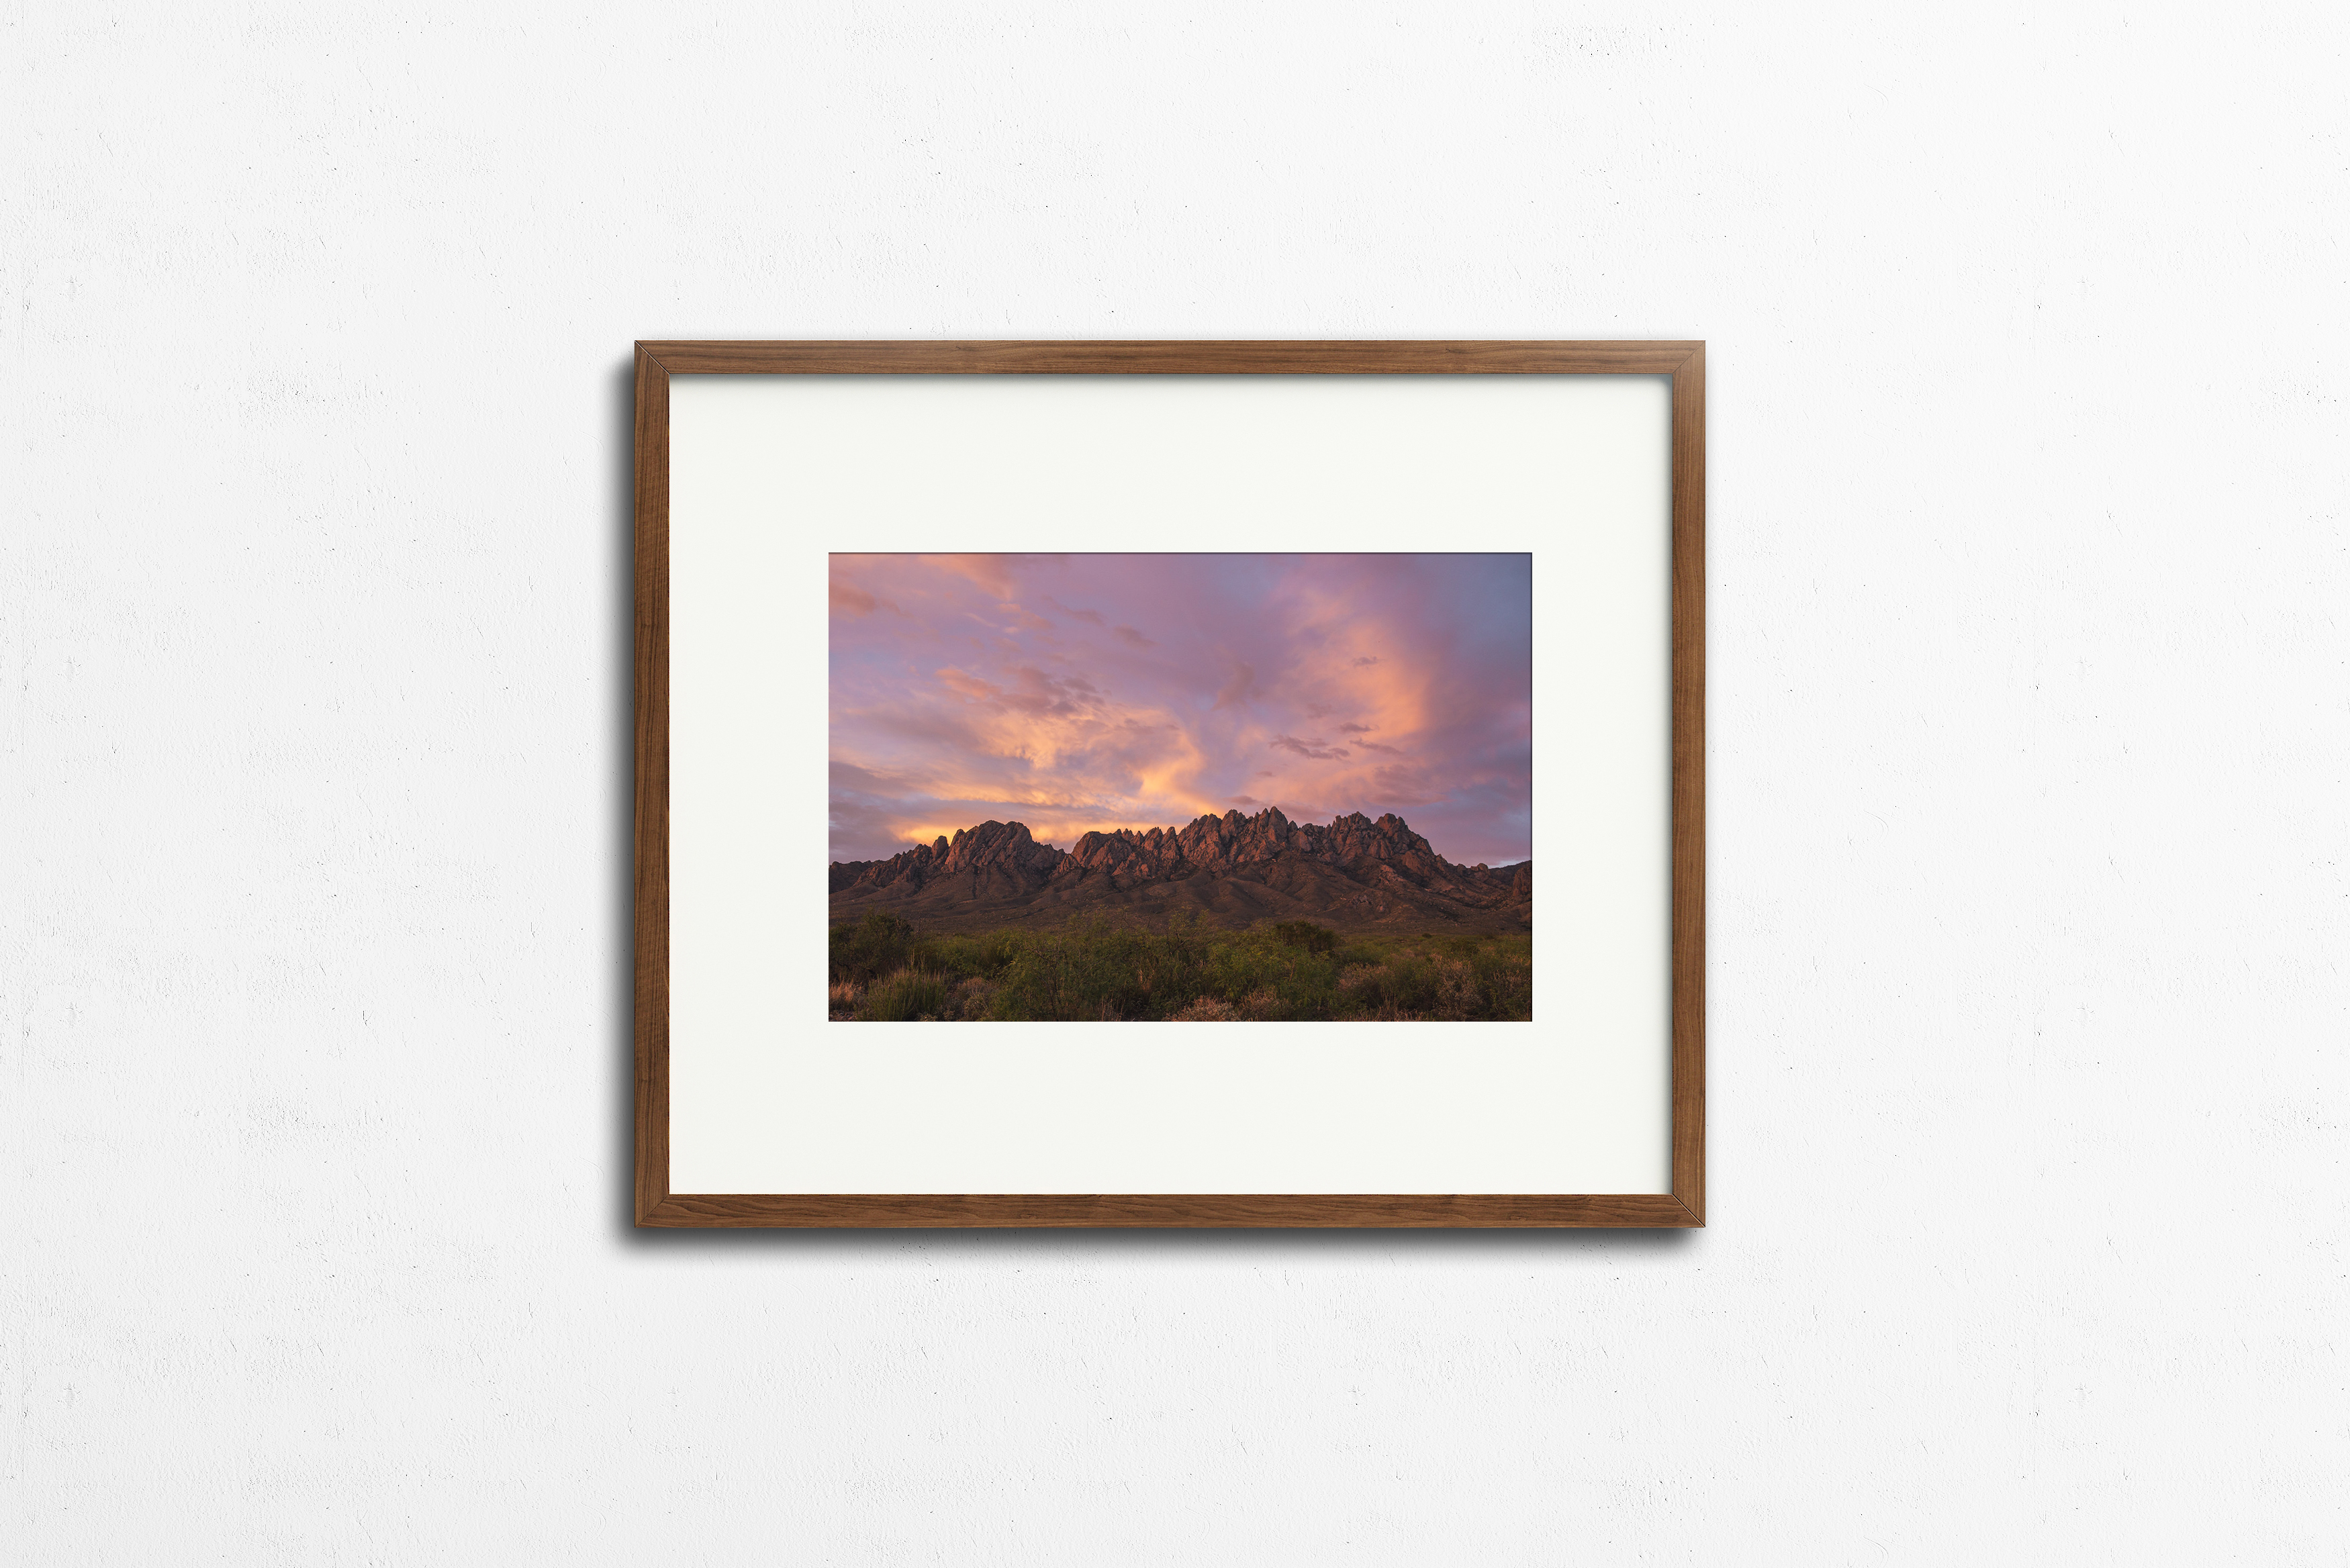 Photography: Organ Mountain Spring Sunset - Organ Mountain Outfitters